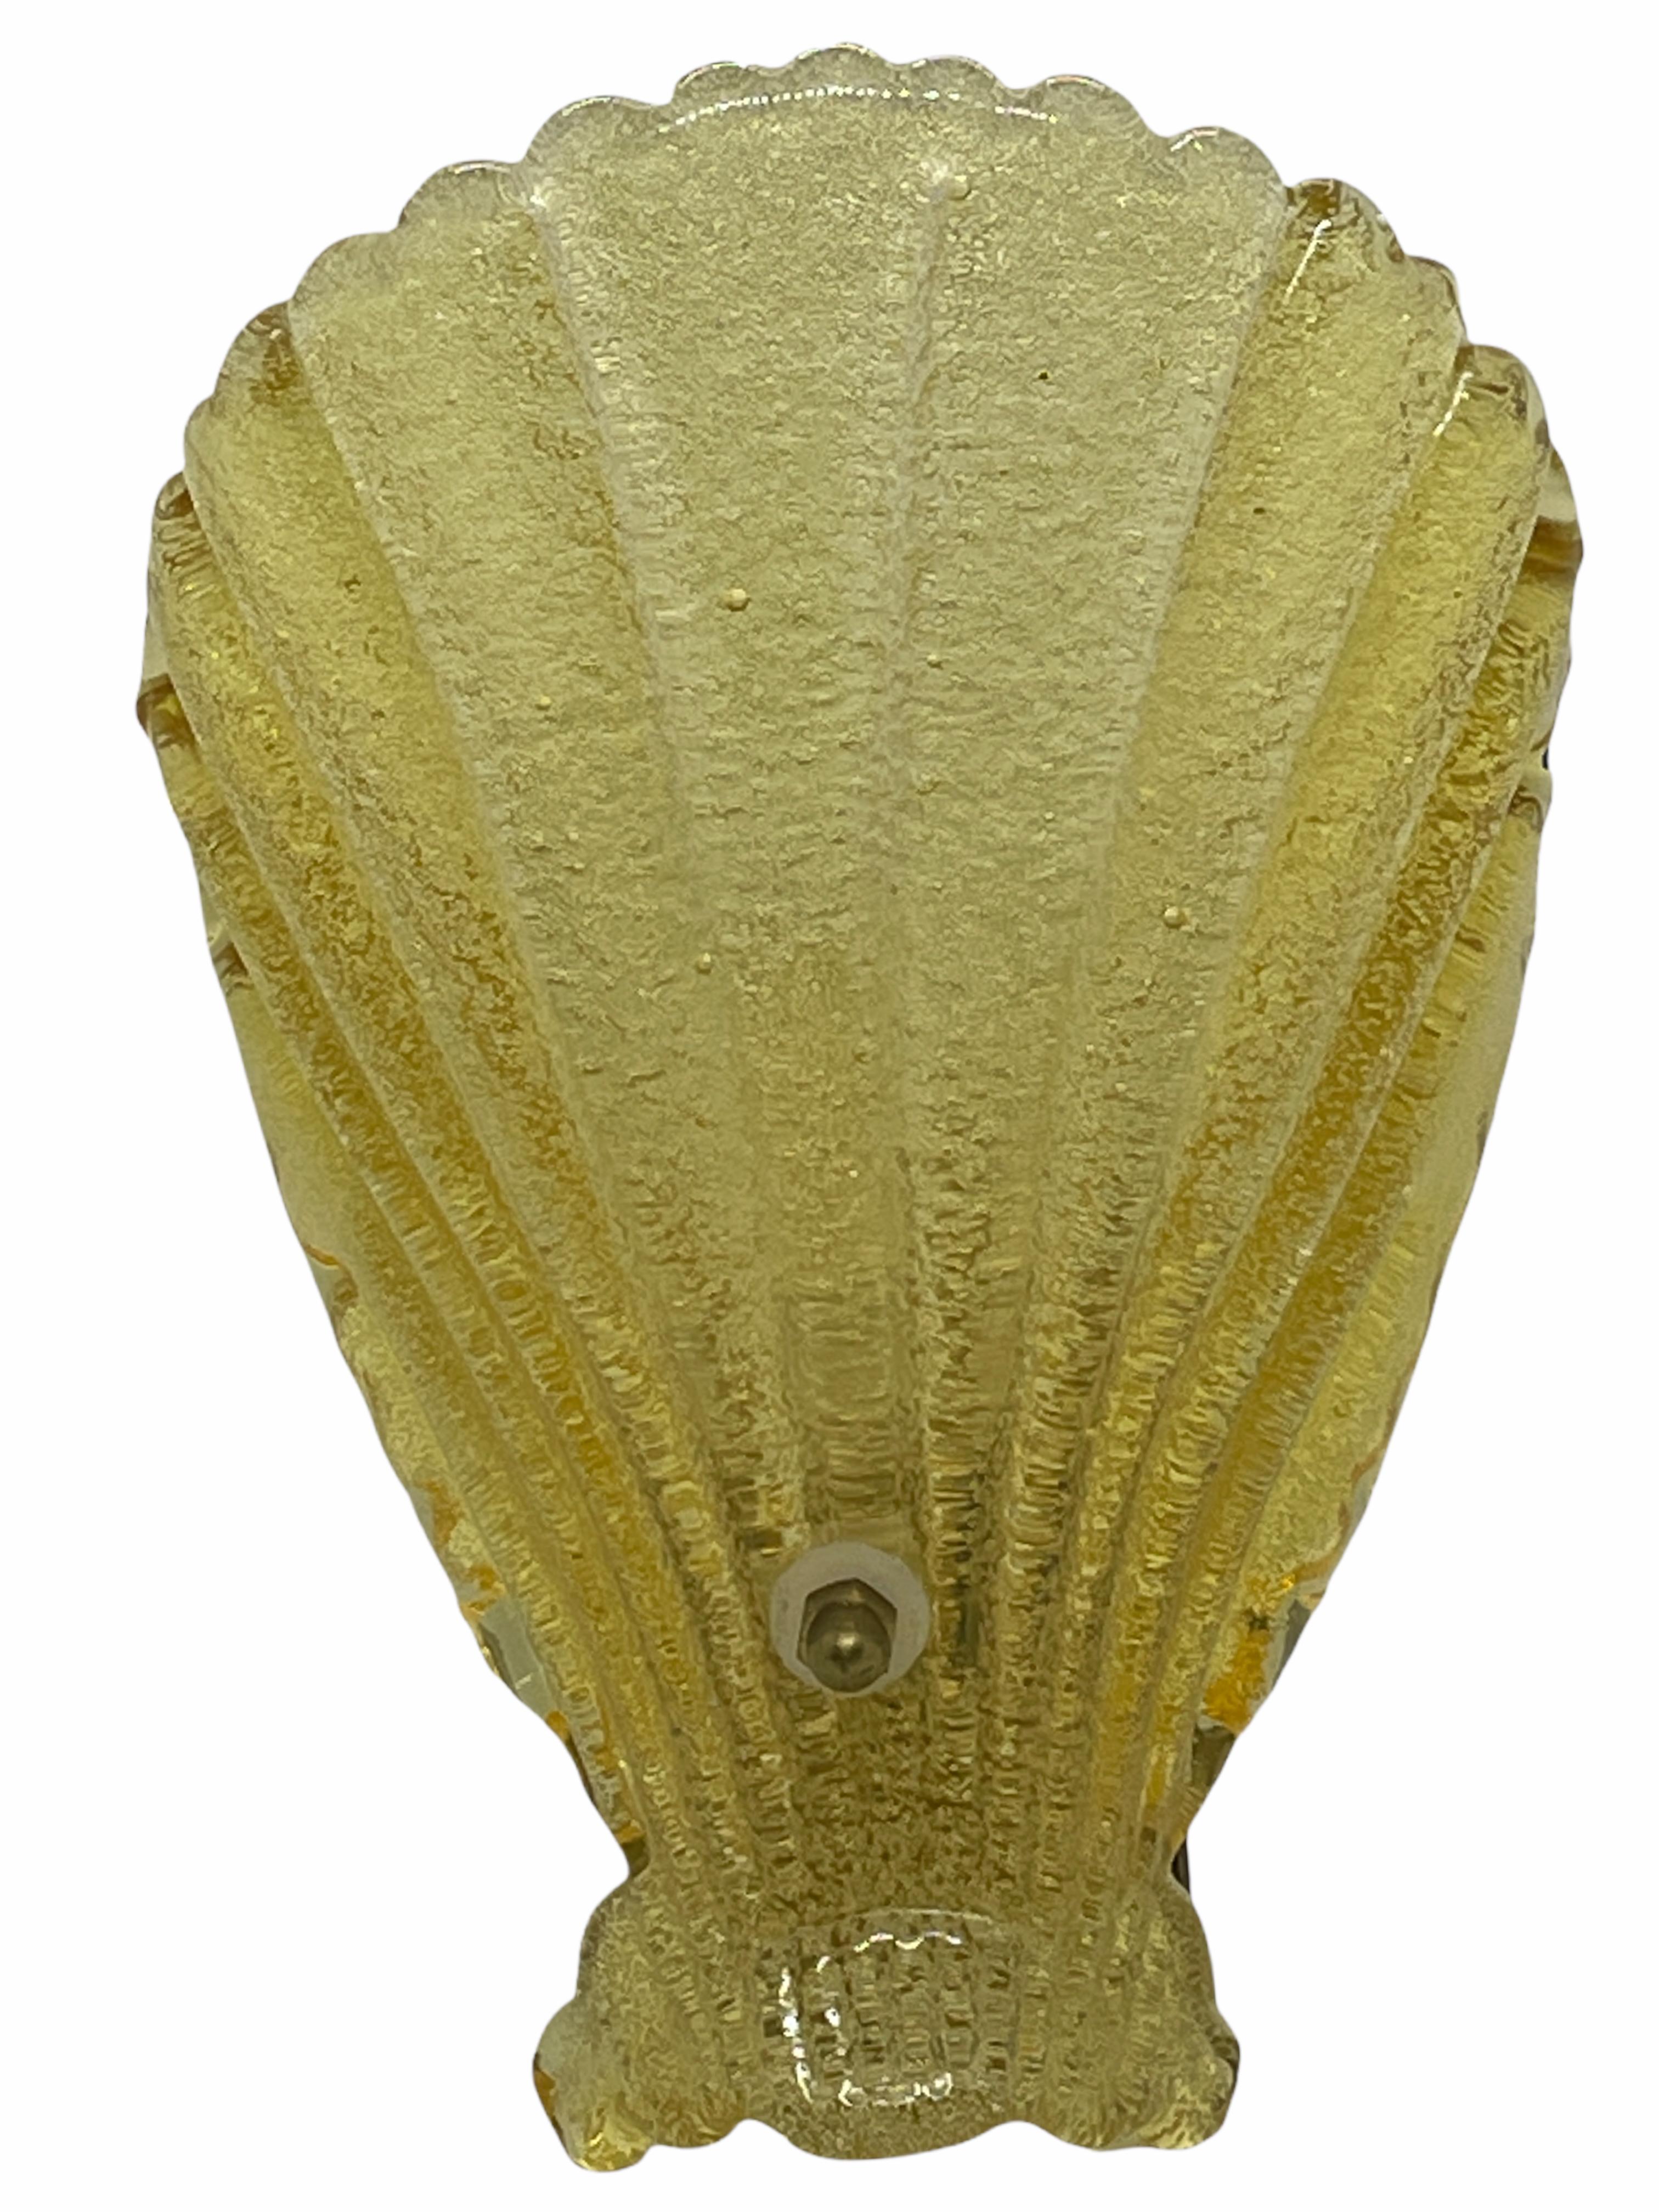 A single sea shell form wall light, produced in Germany by Soelken Leuchten, in textured glass, affixed against a brass base, circa 1960s. The glass shade is probably made in Murano Italy and base made in Germany. An iconic design from the 1960s and